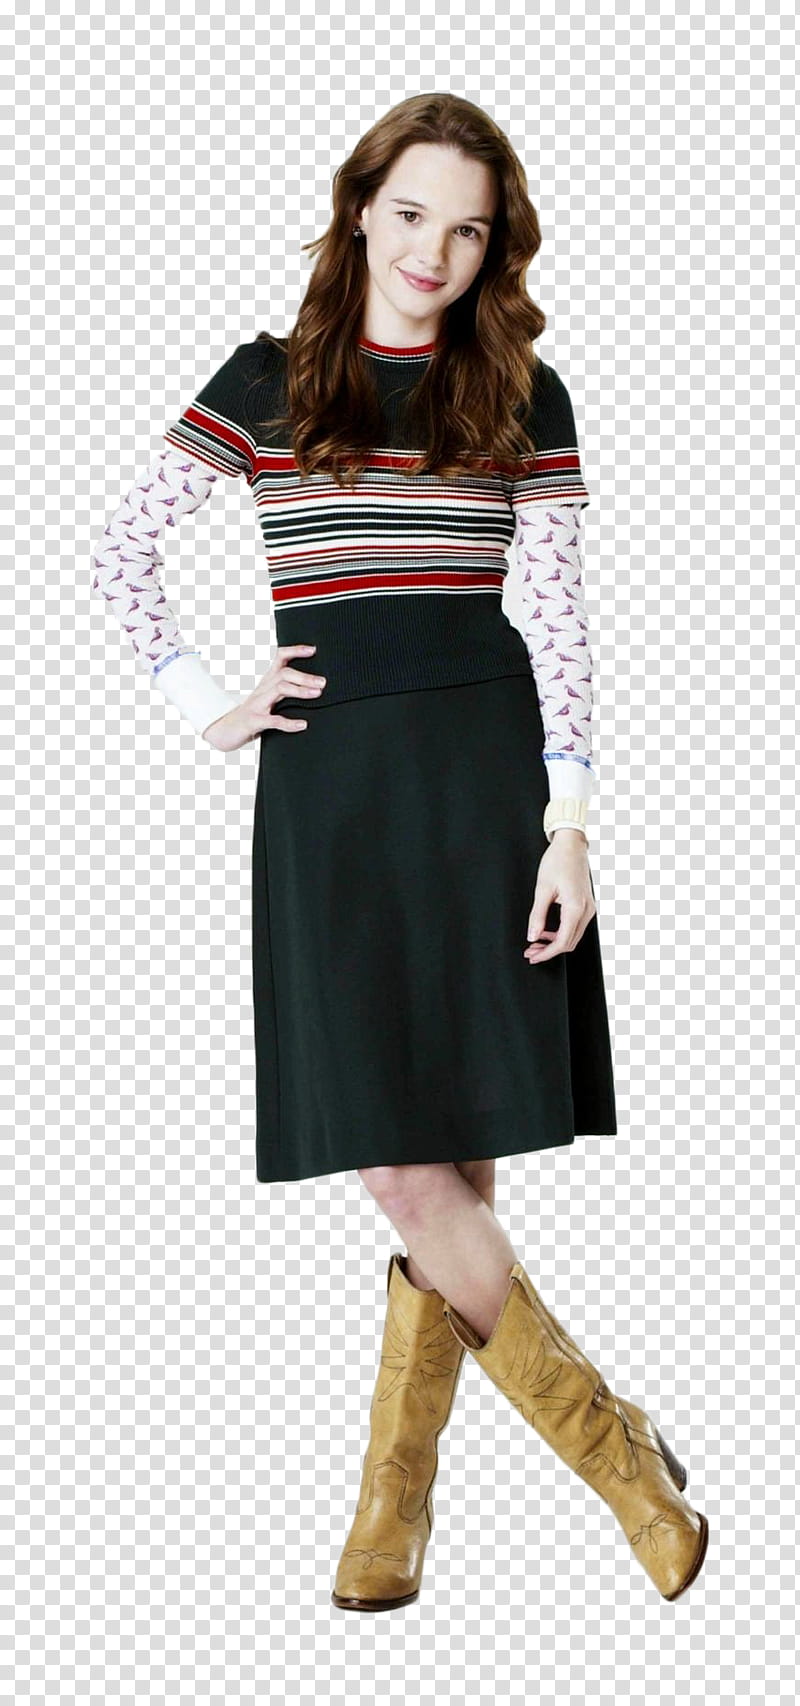 Kay Panabaker transparent background PNG clipart